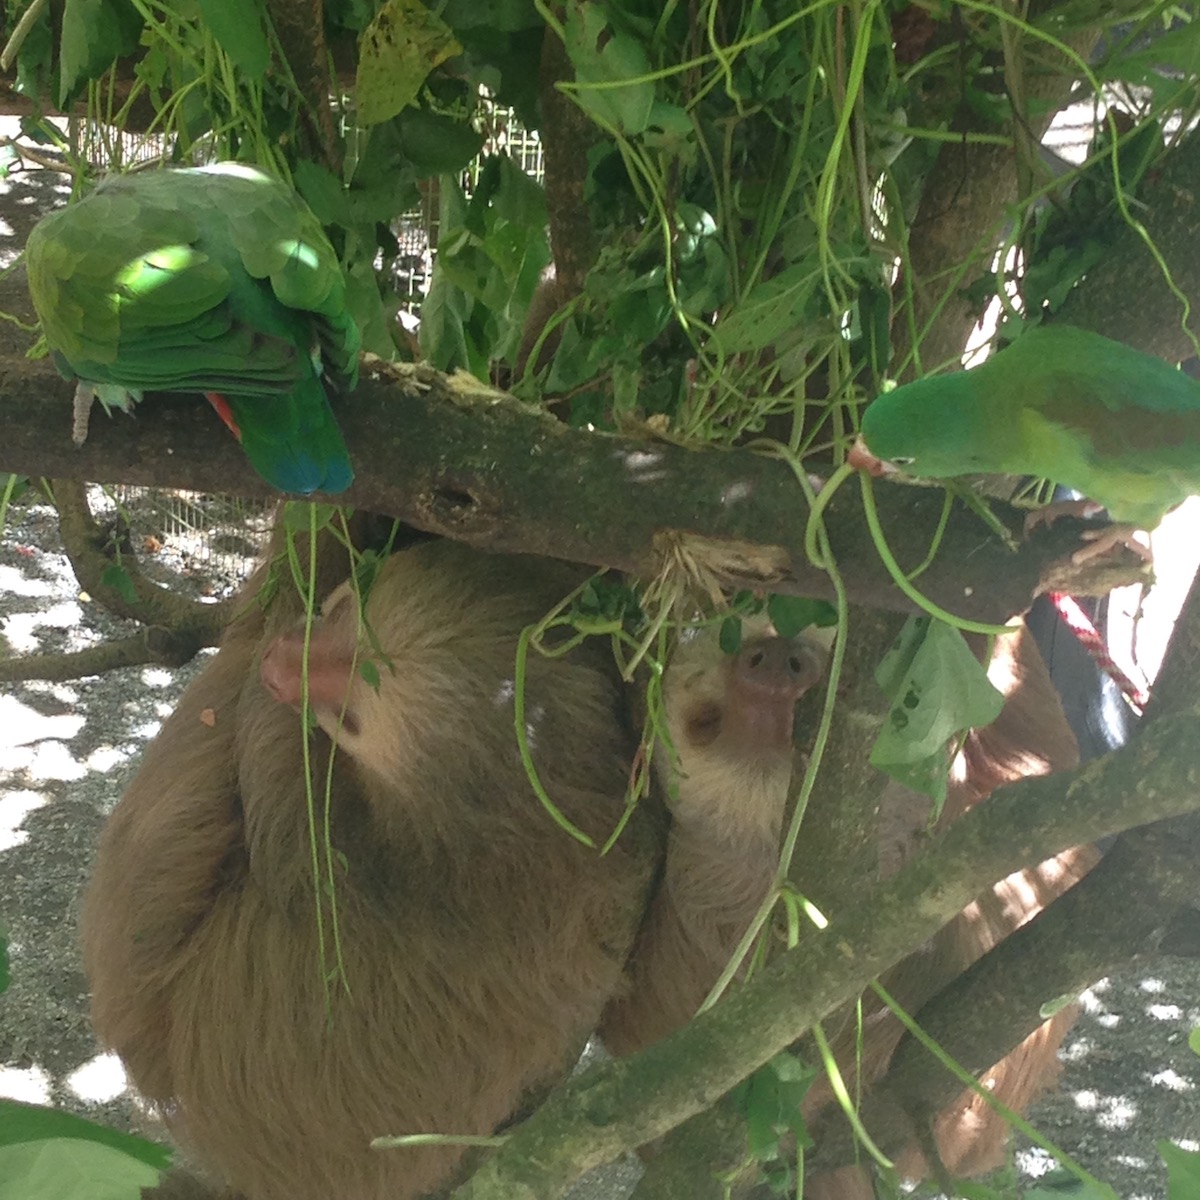 Two sloths hanging asleep together in a Costa Rican sanctuary.